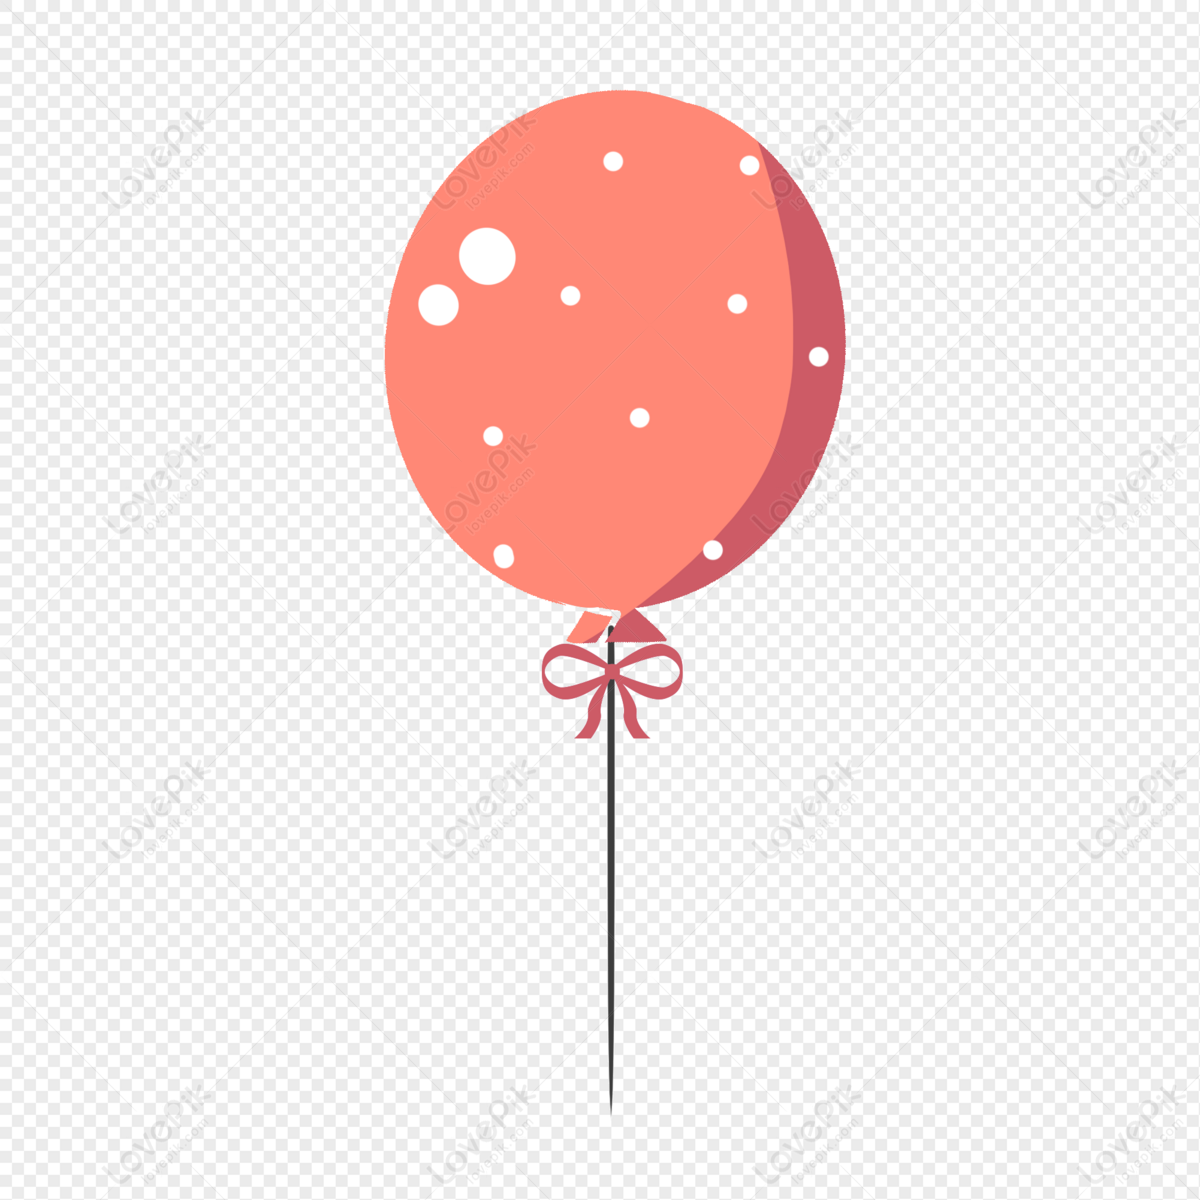 Cartoon Orange Balloon PNG Transparent Image And Clipart Image For Free  Download - Lovepik | 401180677